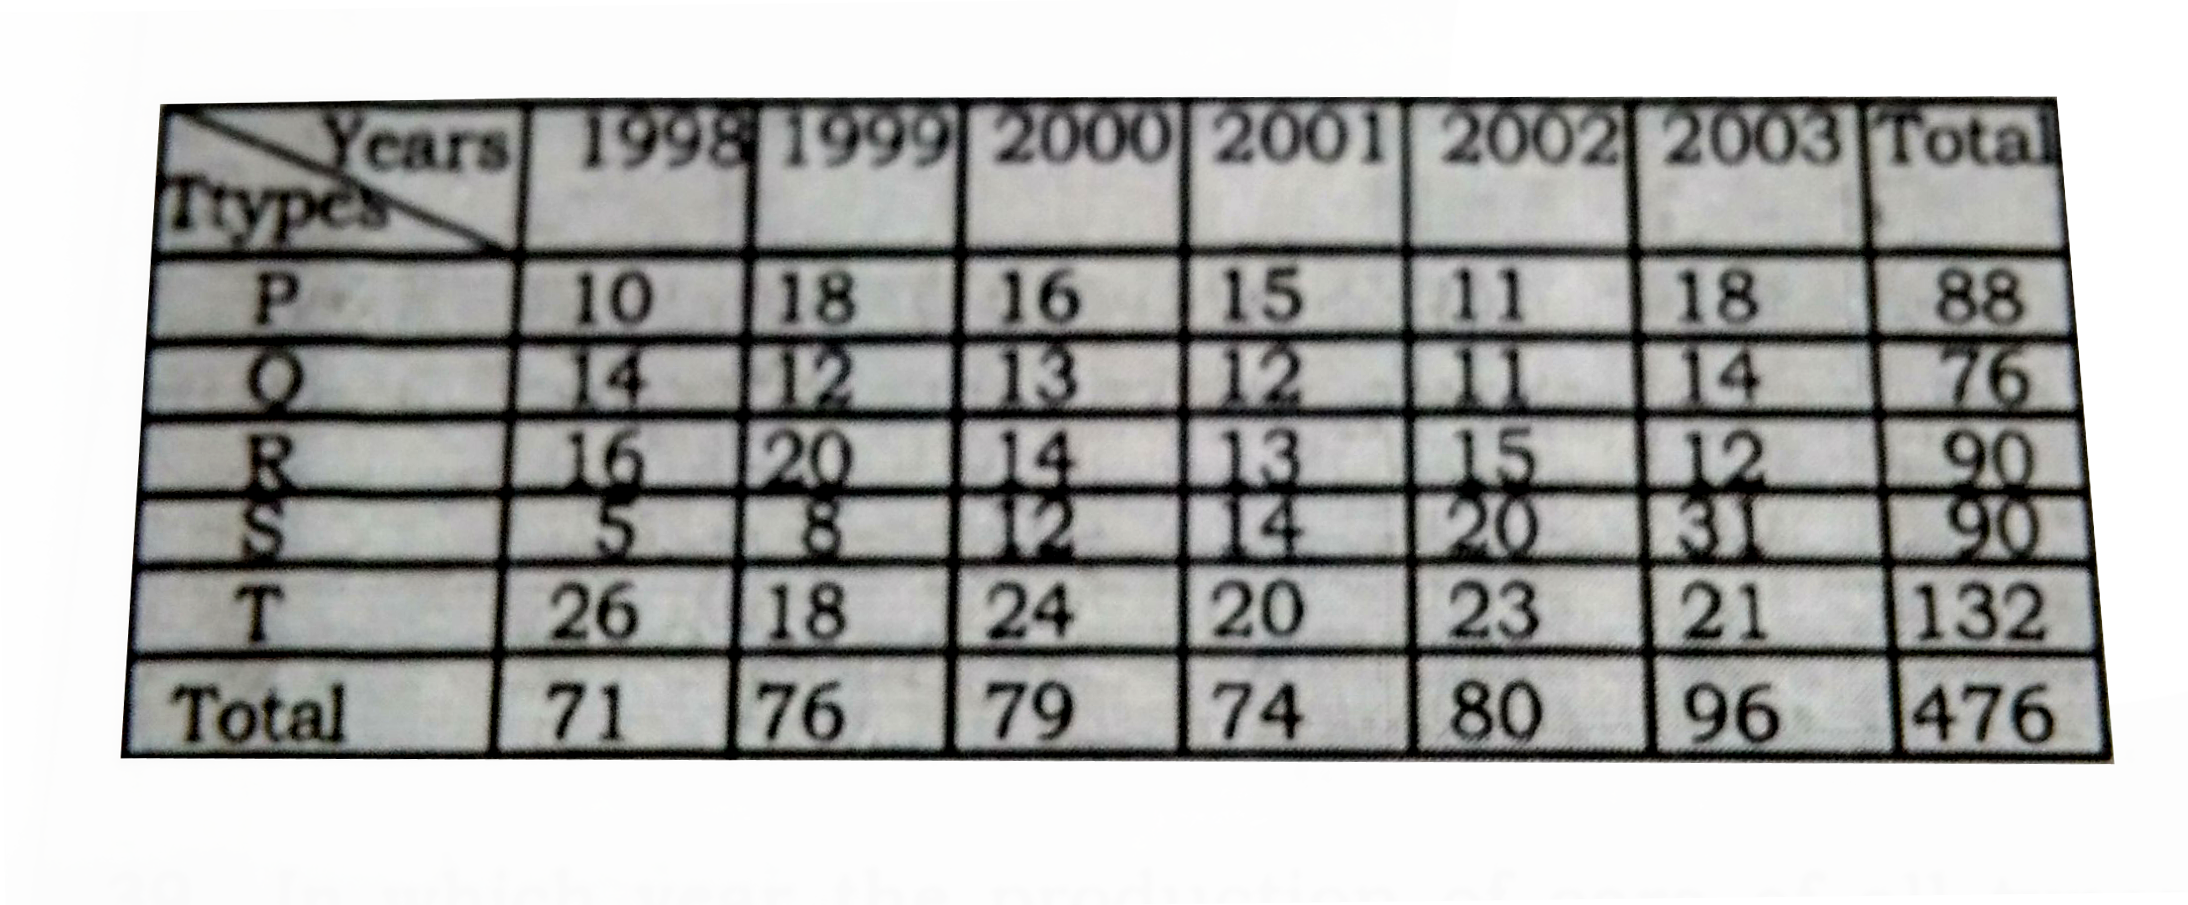 The table given below shows production of five types of cars by a company from the year 1998 to 2003 Study the table and answer the question.      किस वर्ष में सभी कारो का कुल उत्पादन इस सत्र के औसत उत्पादन के लगभग बराबर है ।